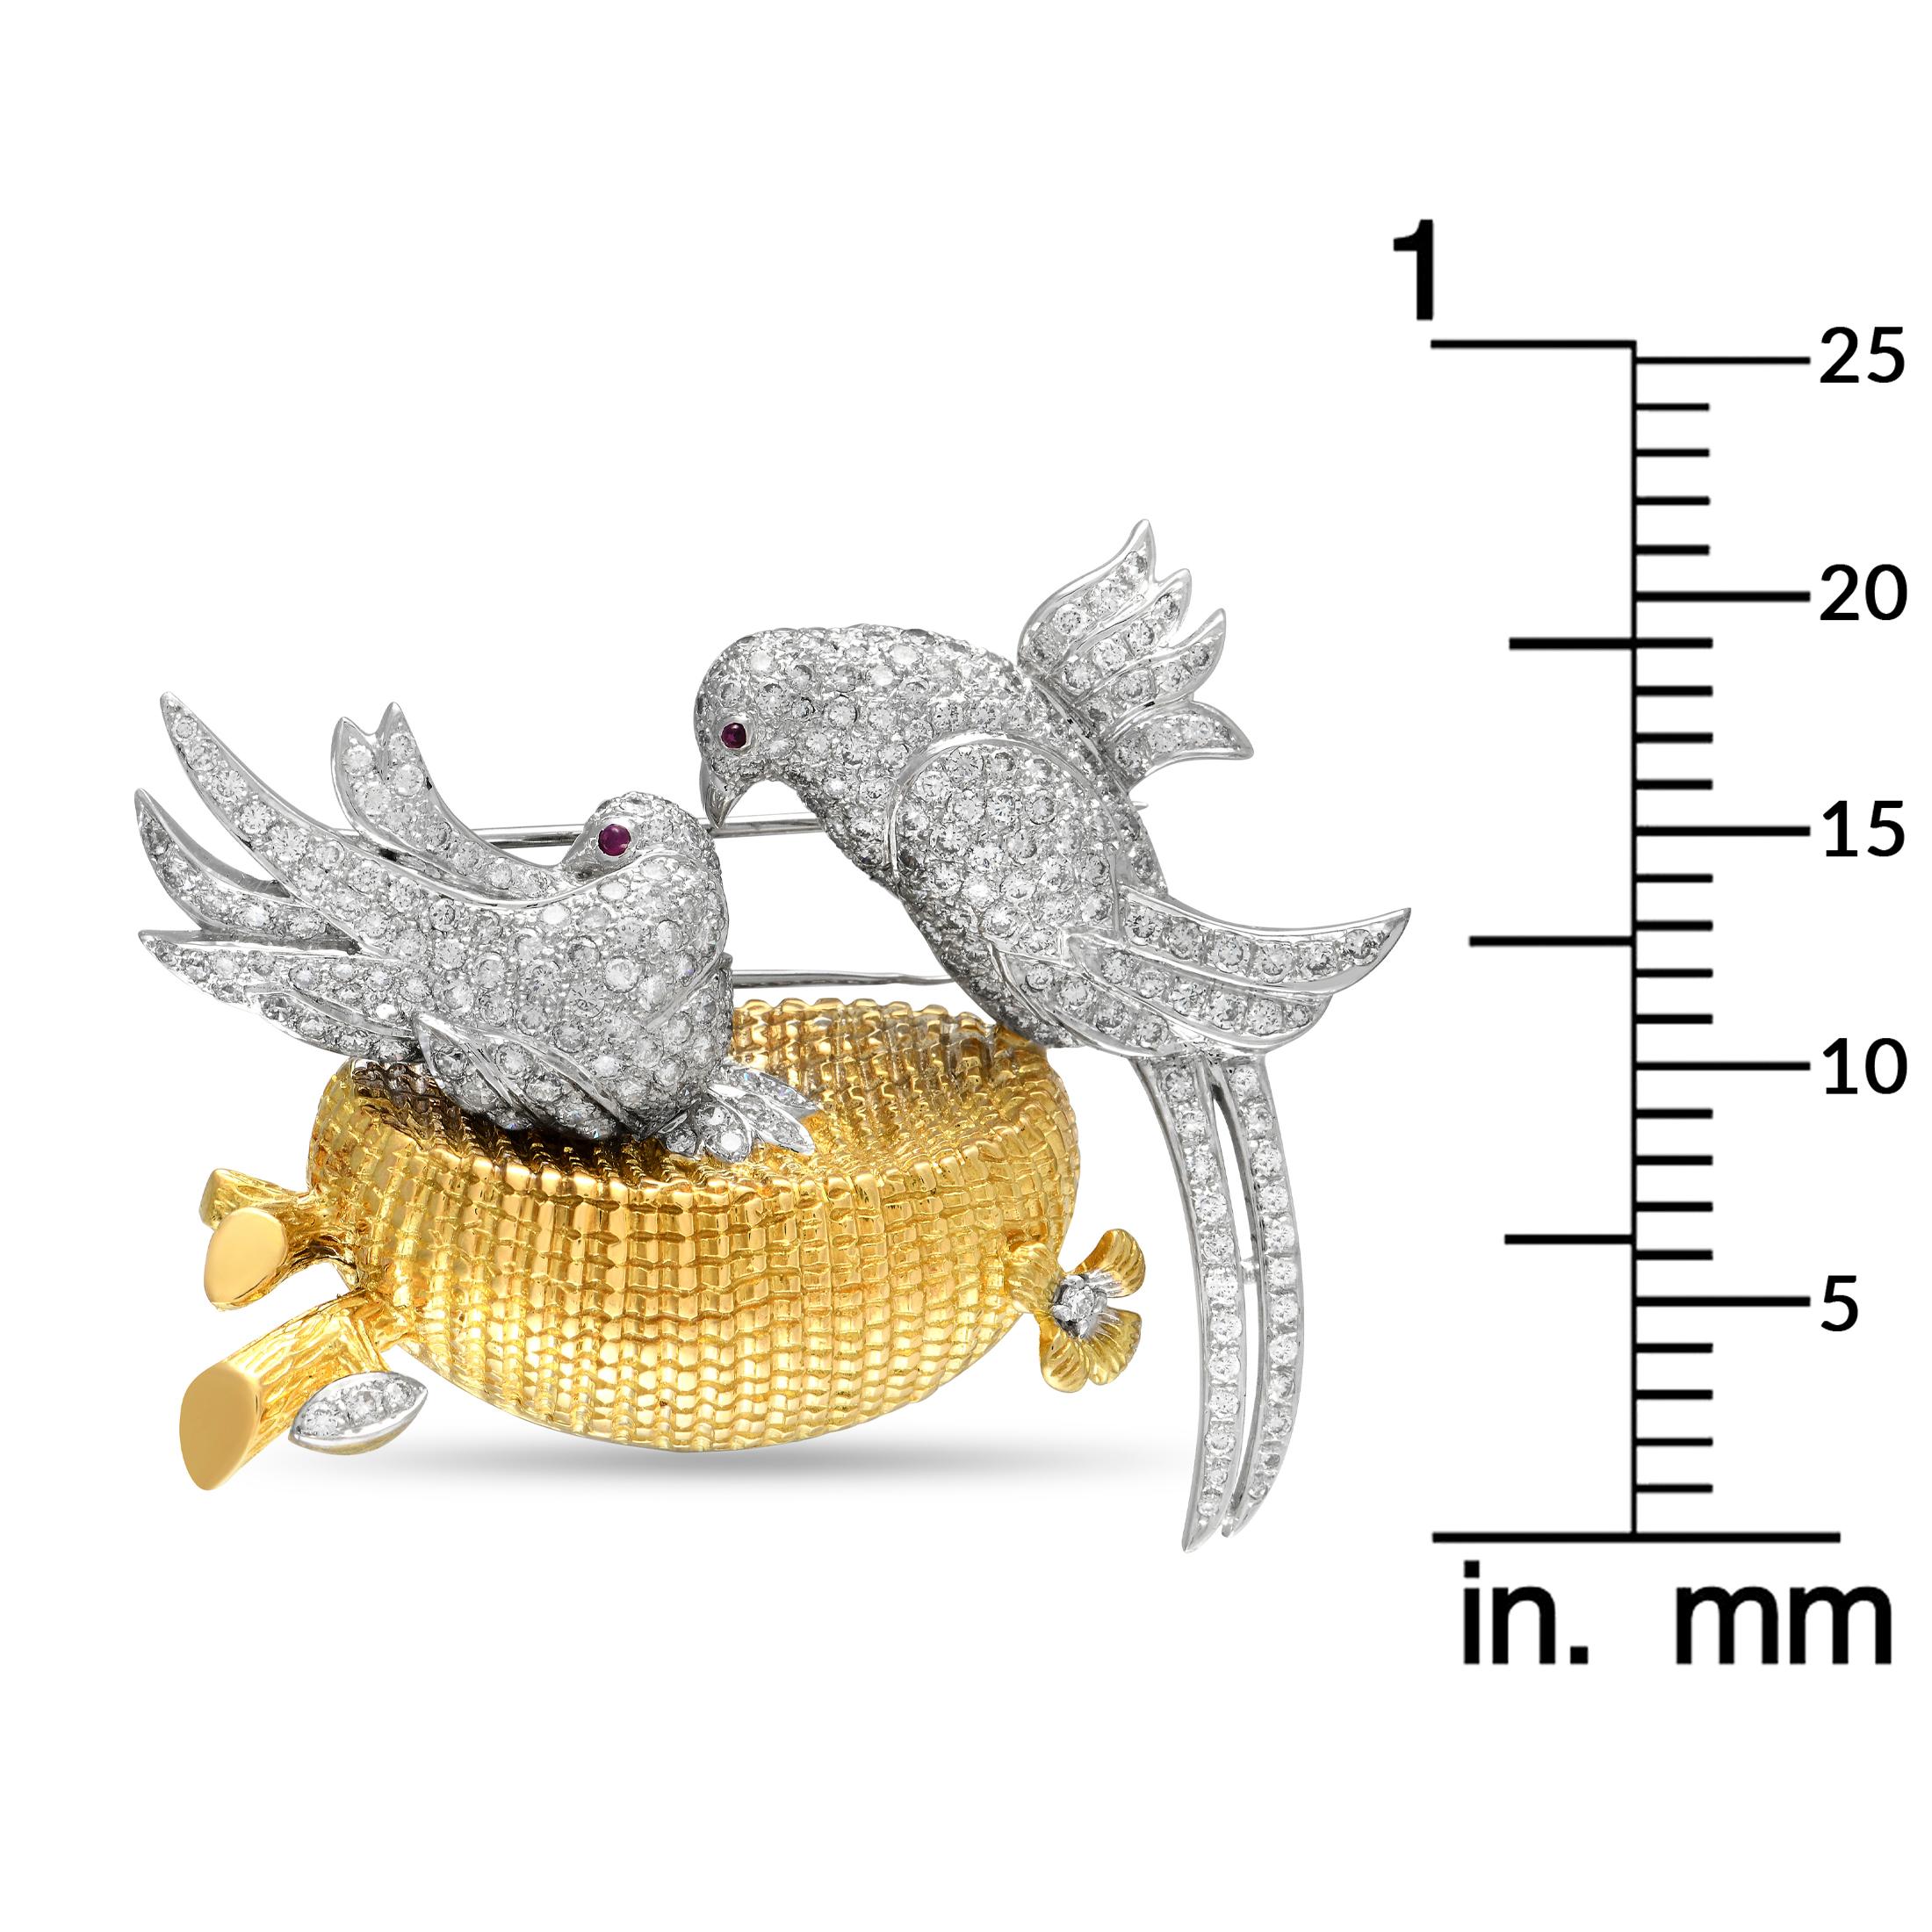 Here is an LB Exclusive brooch perfect for when you need to add a hint of glamour or a statement-making finish to an outfit. It measures 2.15 by 1.80 inches and features a textured yellow gold bird nest with two white gold birds fully covered with